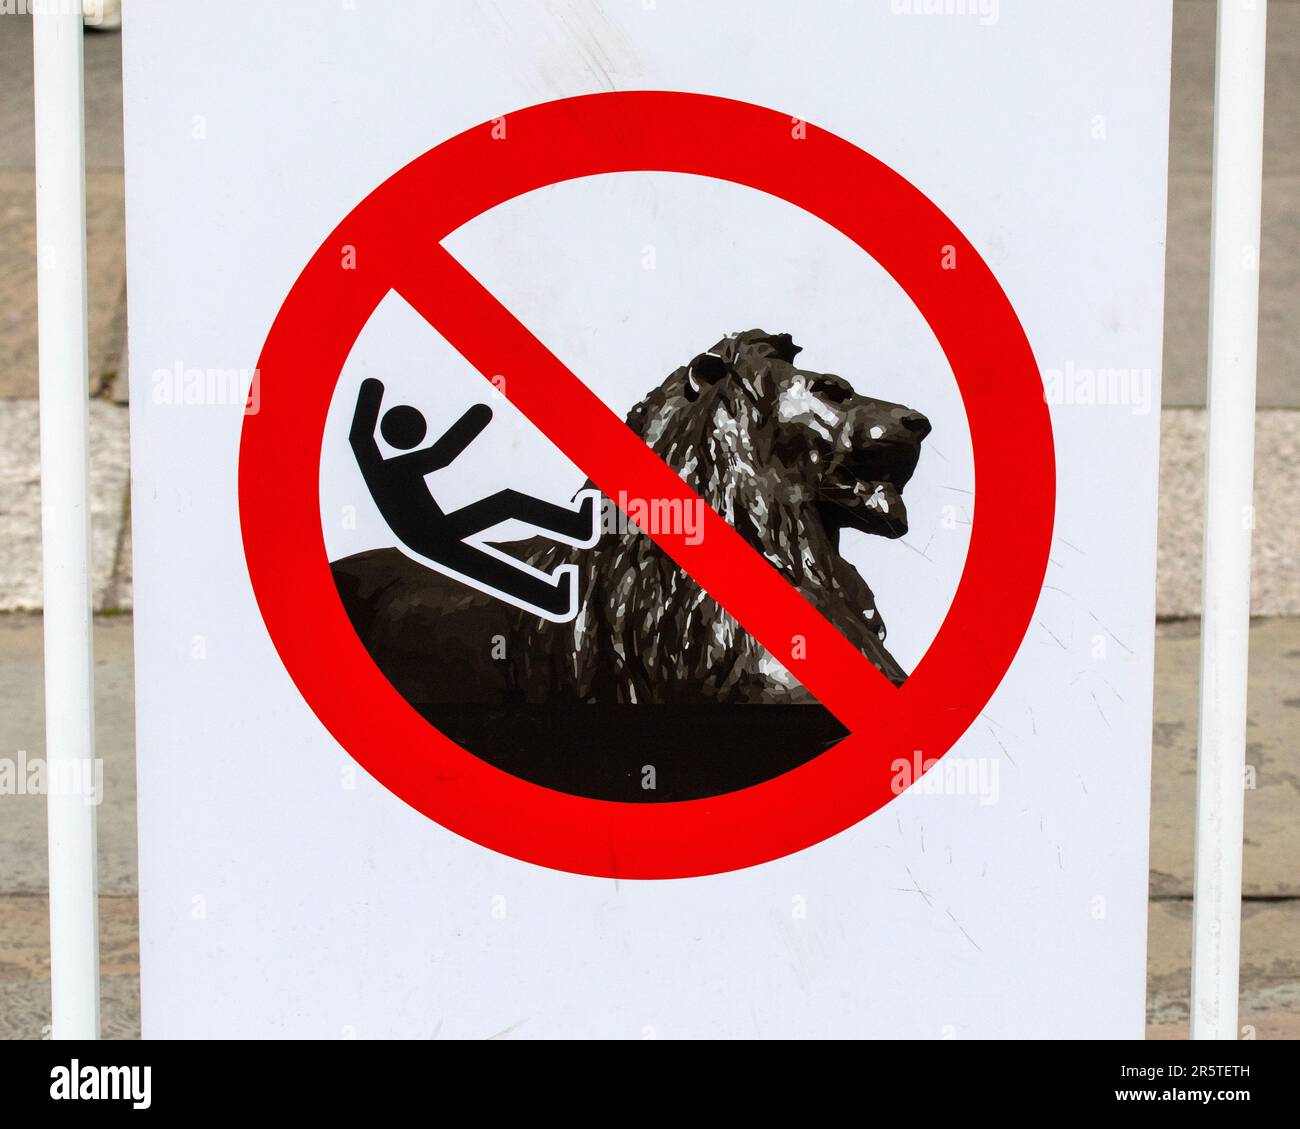 London, UK - April 30th 2023: A sign at Trafalgar Square in London, UK, warning visitors not to climb the Lion sculptures. Stock Photo